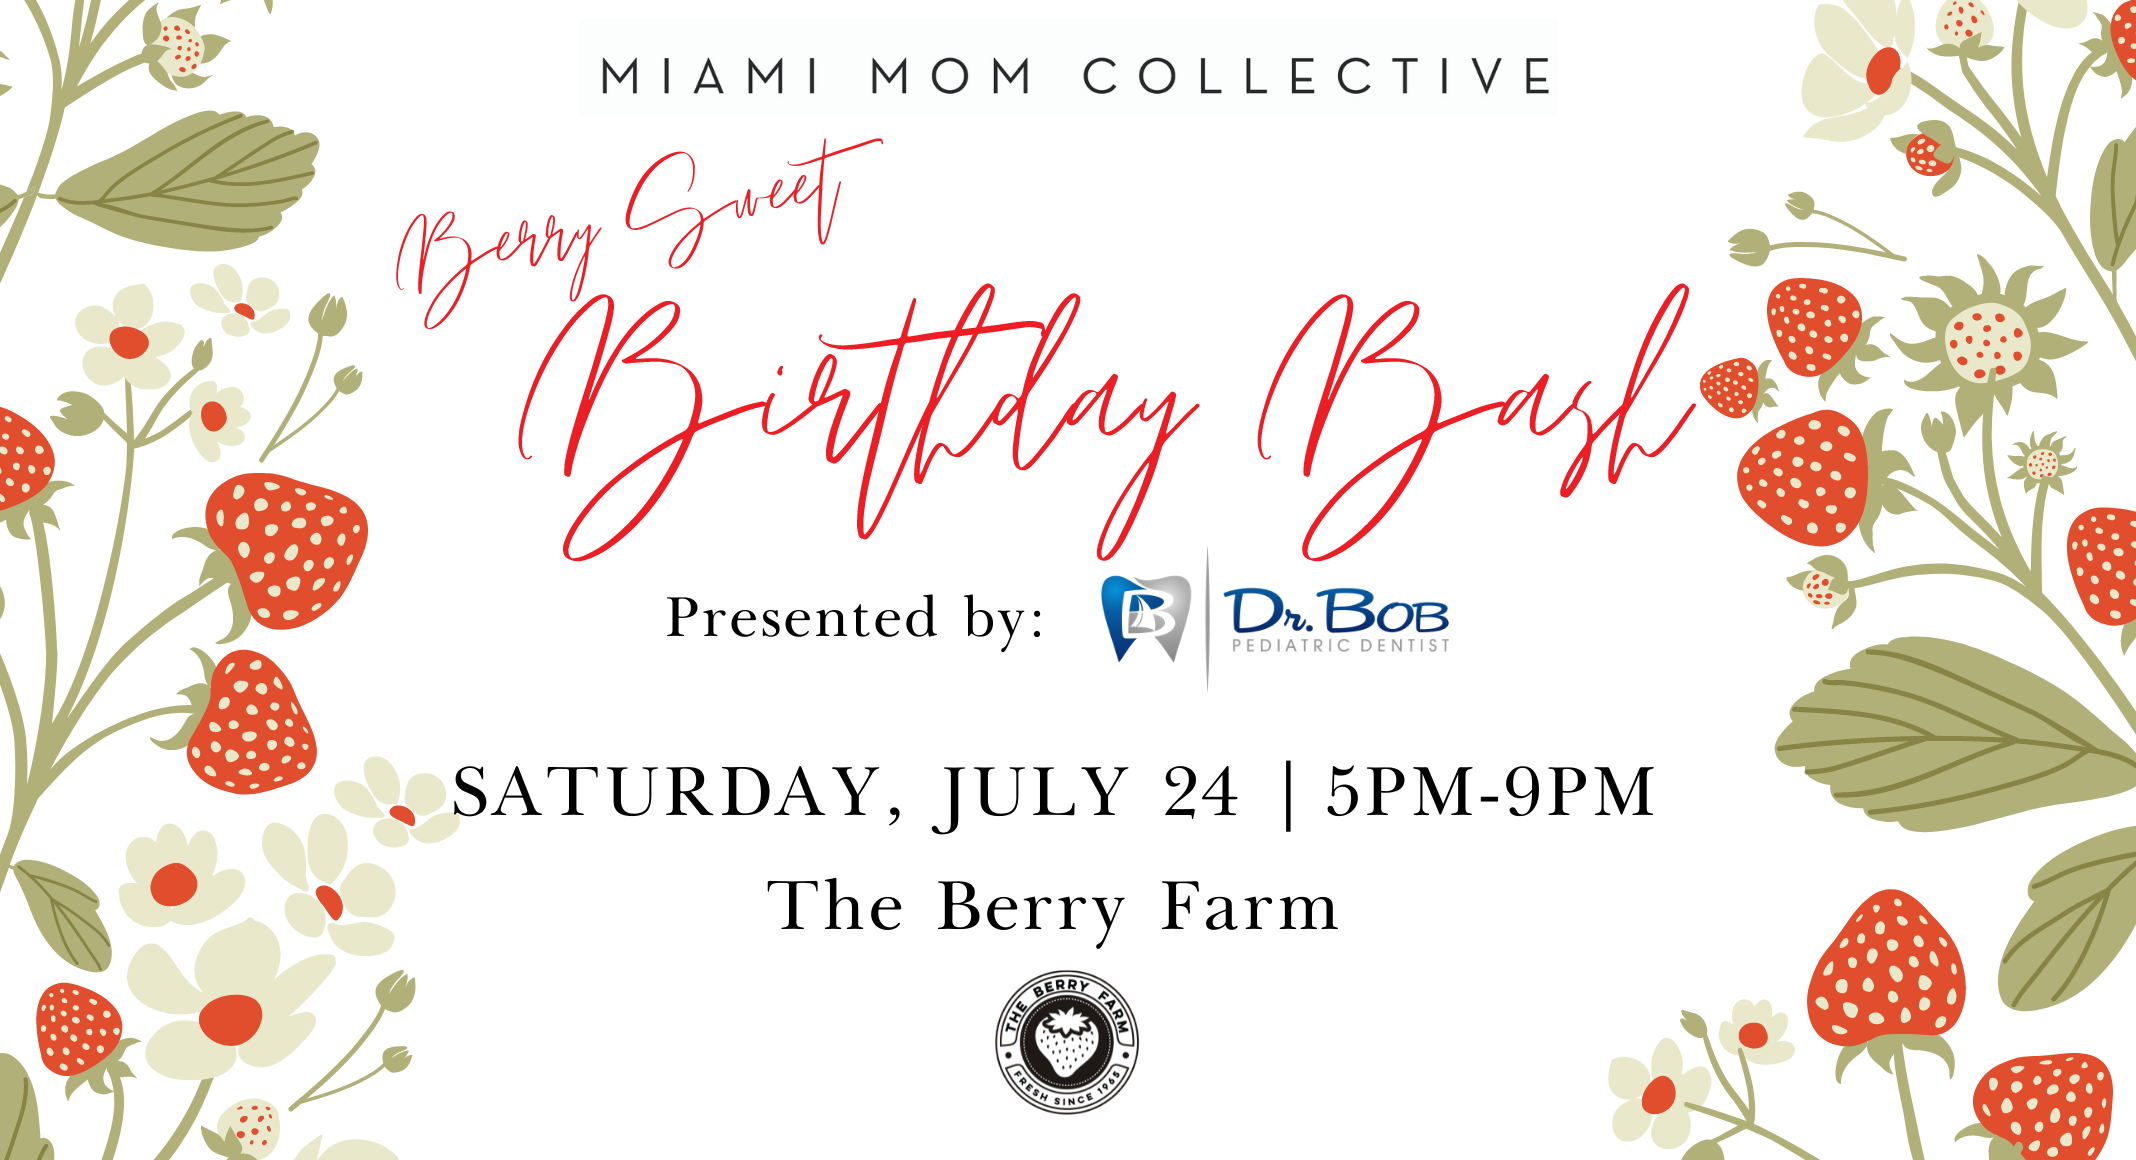 Miami Mom Collective 3rd Birthday Bash at The Berry Farm 